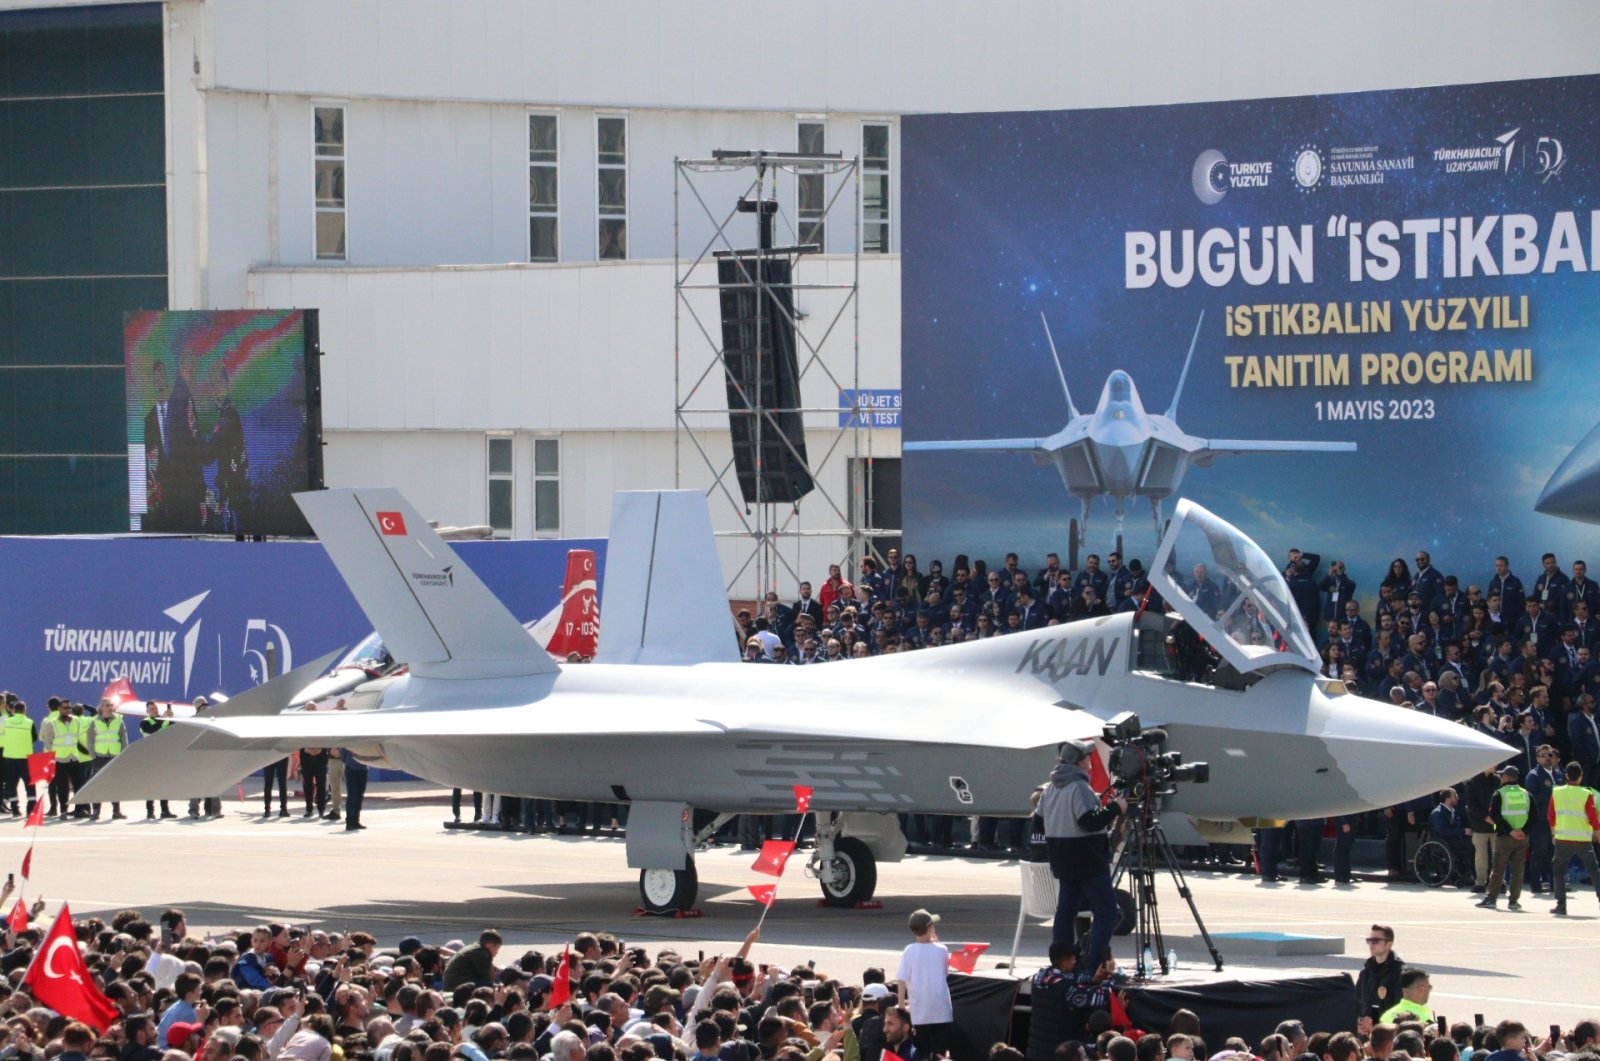 Fighter jet Kaan is seen at the &quot;Century of the Future&quot; event at the Turkish Aerospace Industries (TAI) headquarters in the Kahramankazan district of Ankara, Türkiye, May 1, 2023